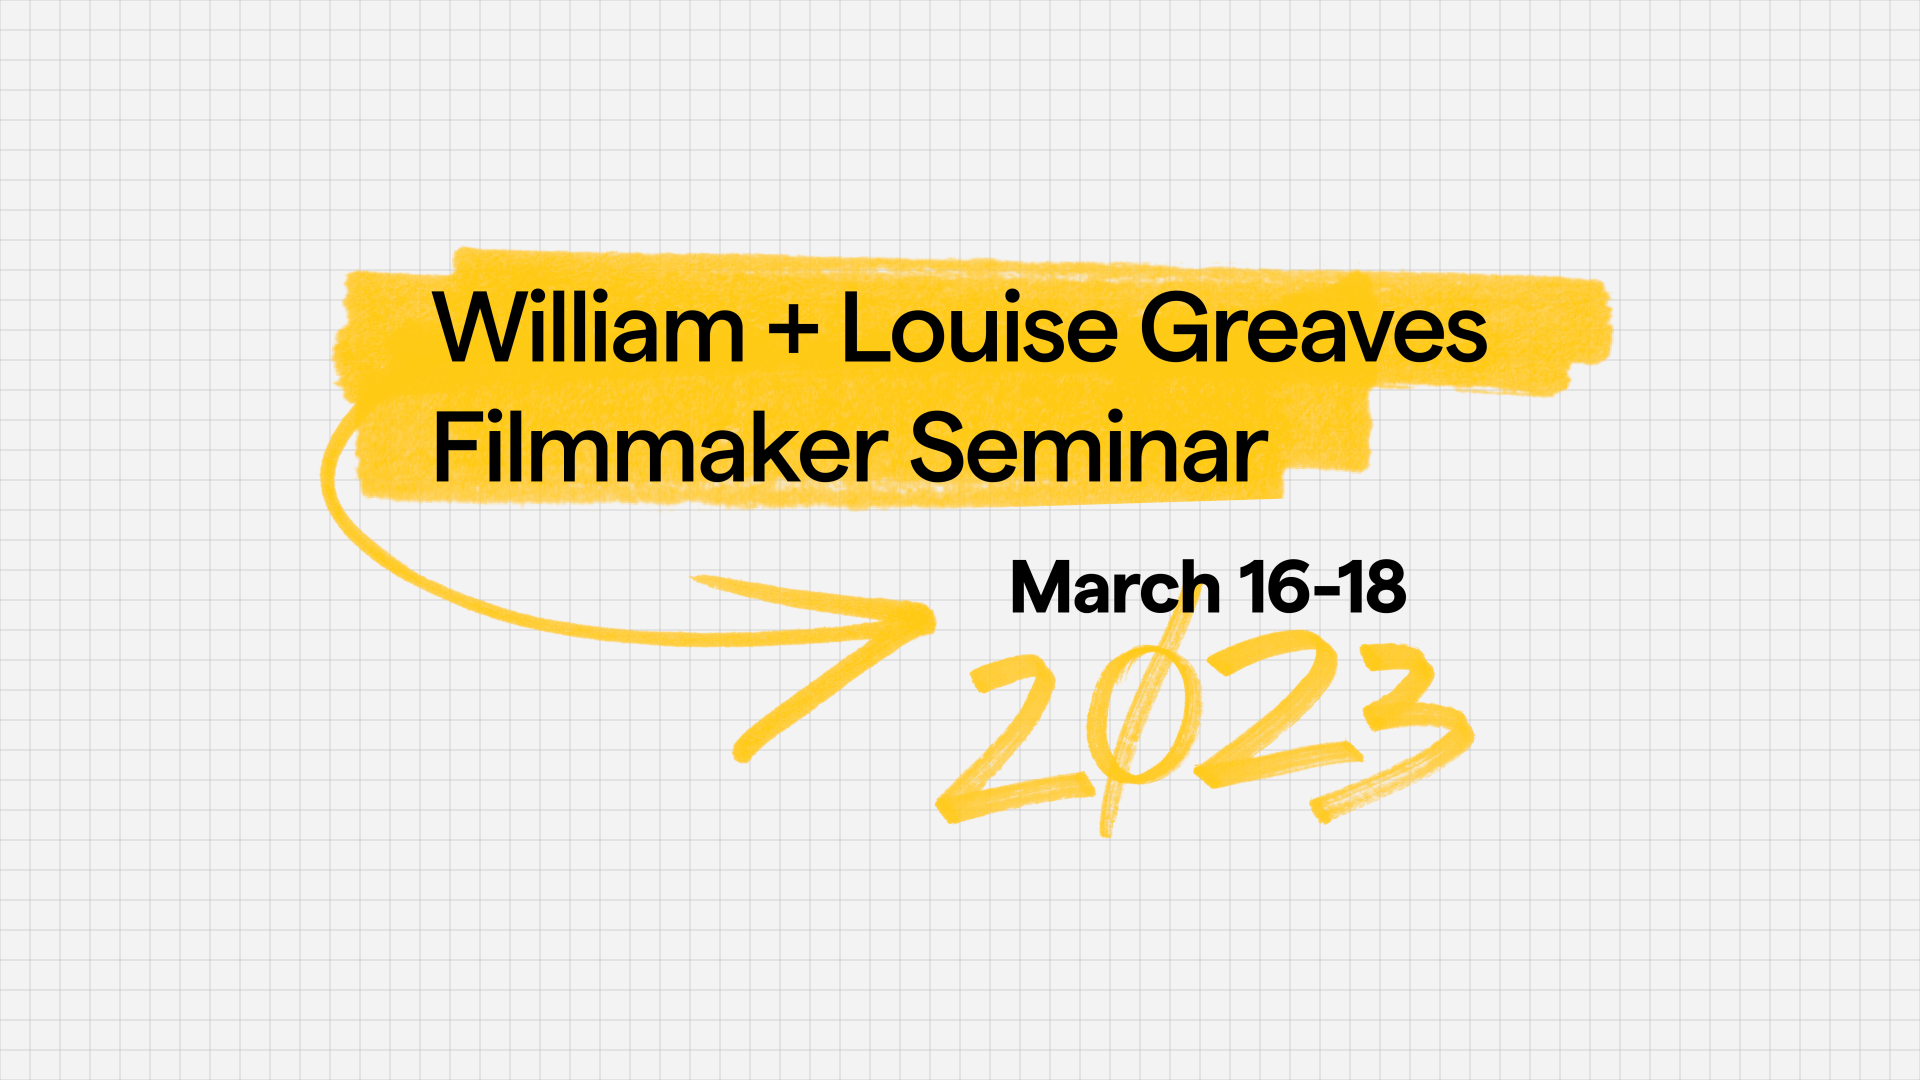 Banner image with the test "William + Louise Greaves Filmmaker Seminar March 16-18 2023"